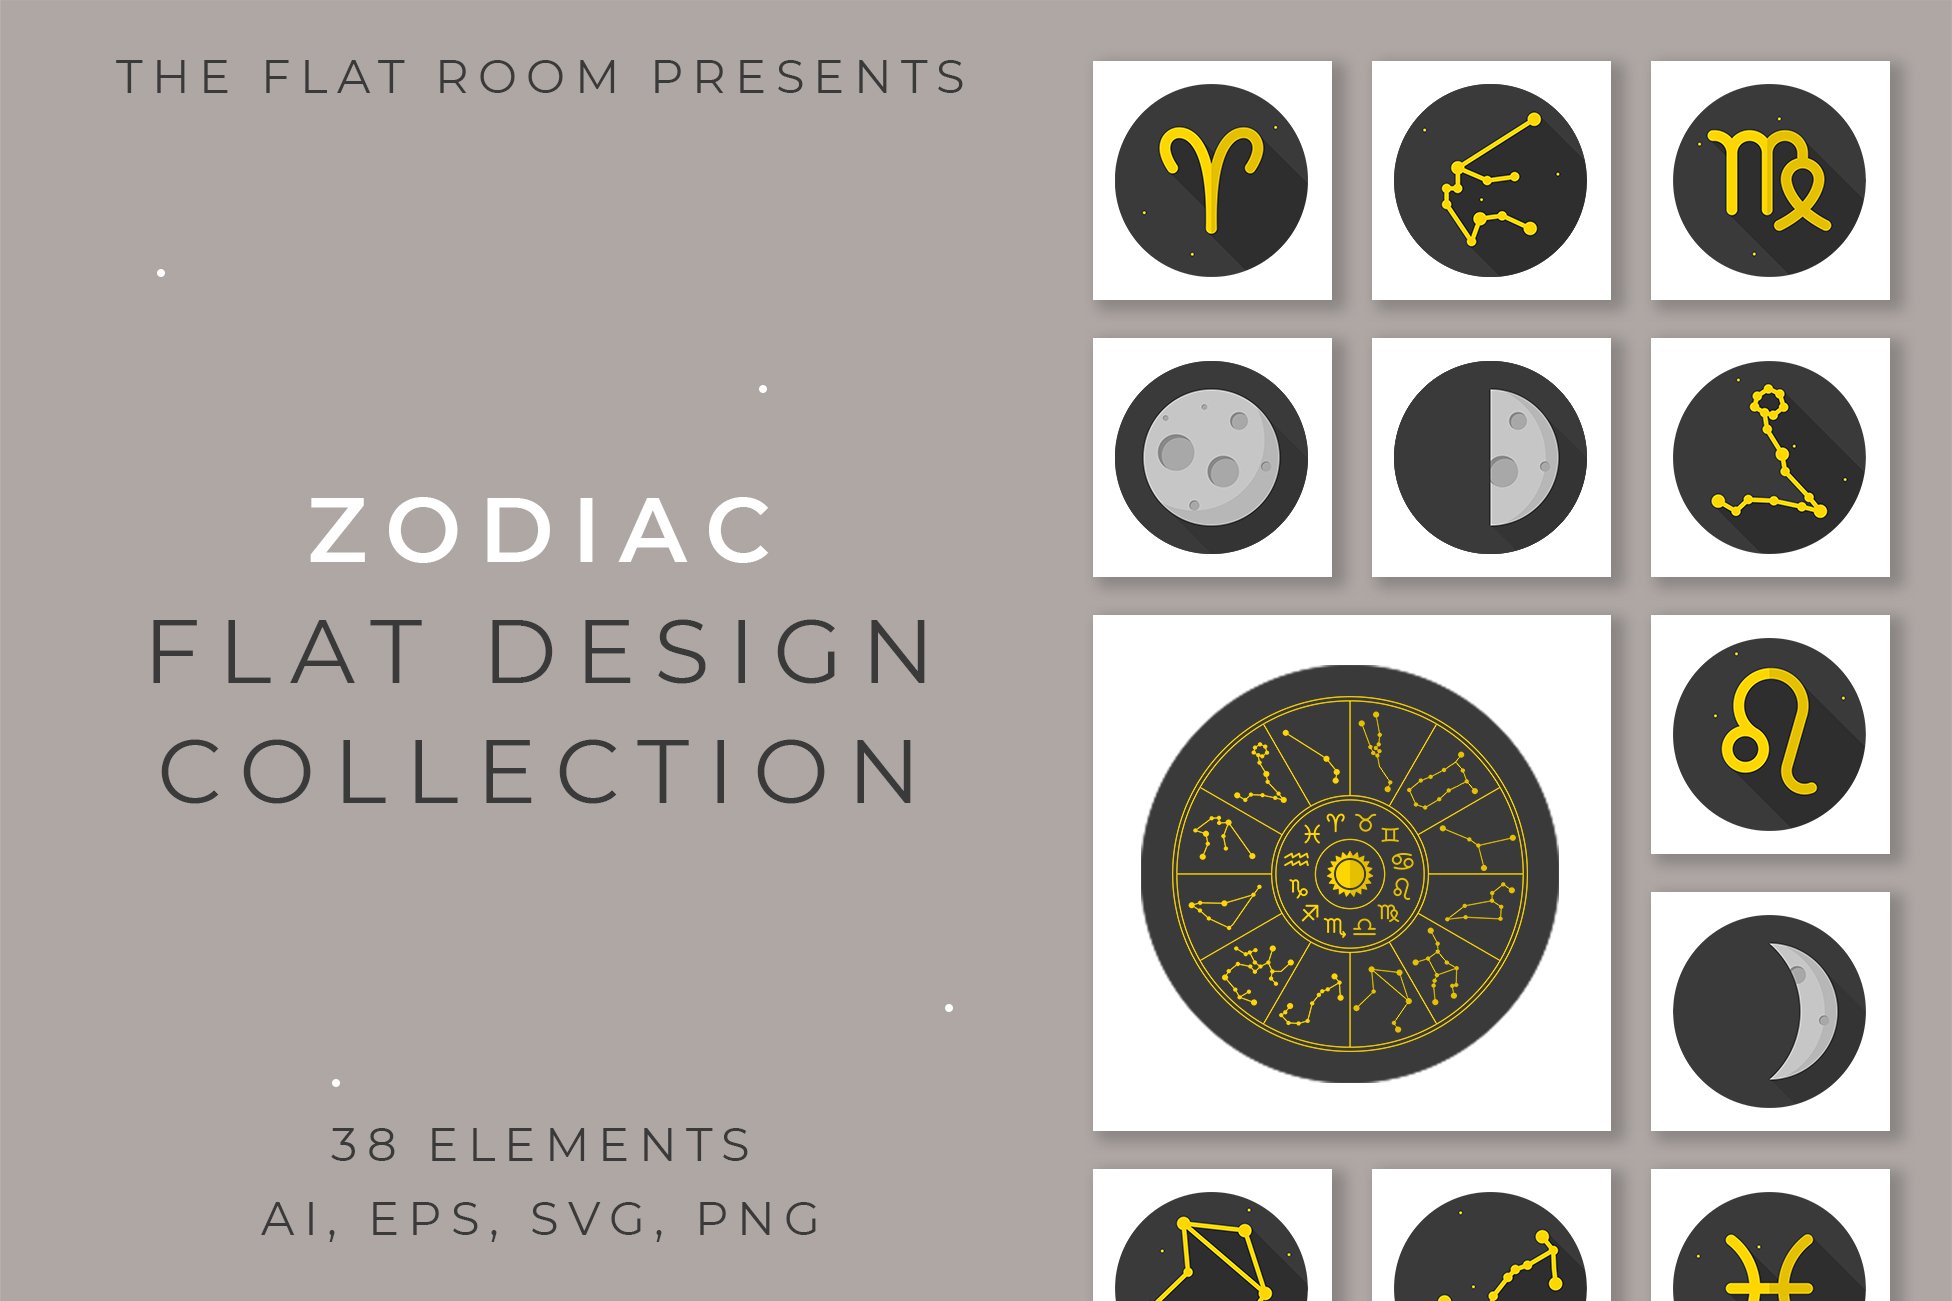 Zodiac Flat Design Collection cover image.